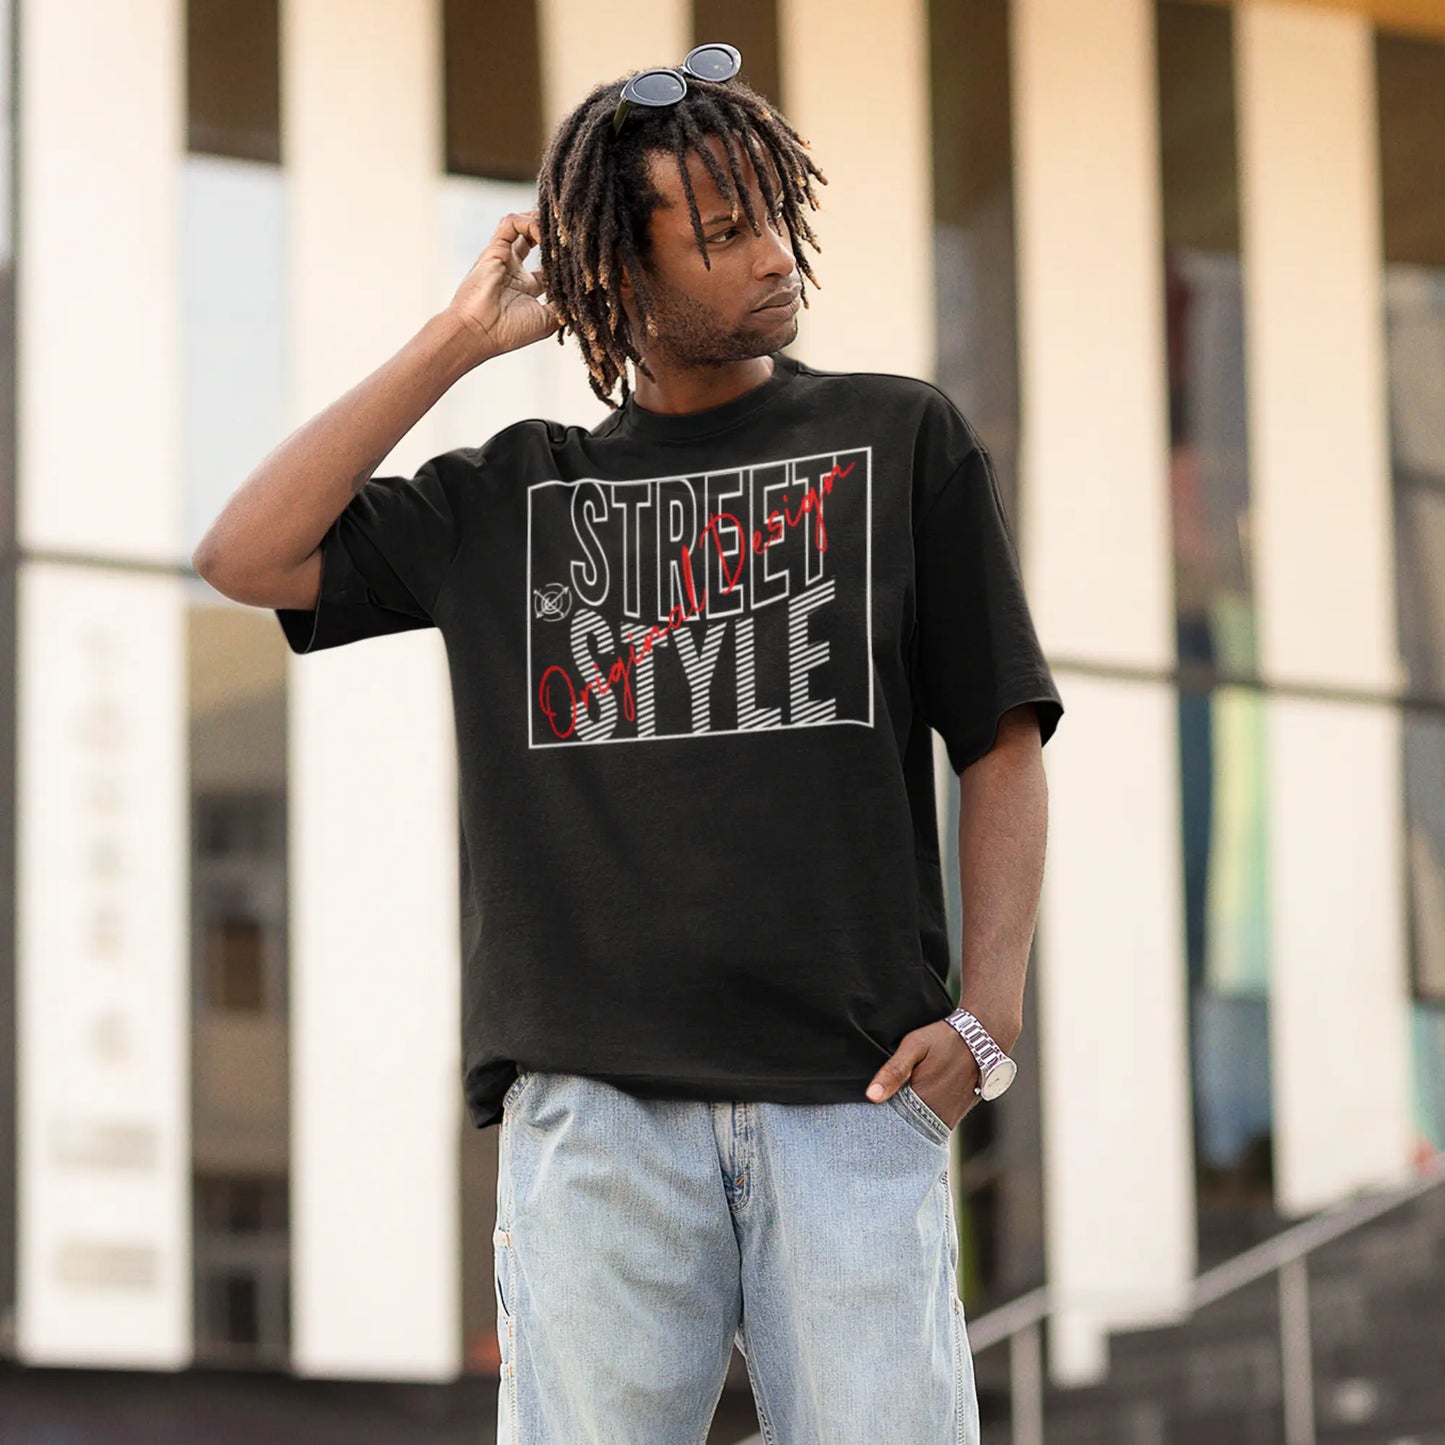 A man with dreadlocks wearing sunglasses atop his head stands casually in an urban setting, donning a black t-shirt with a bold 'STREET STYLE' graphic in stylized white and red fonts, with a small drawing of sunglasses adding to the design's urban aesthetic.